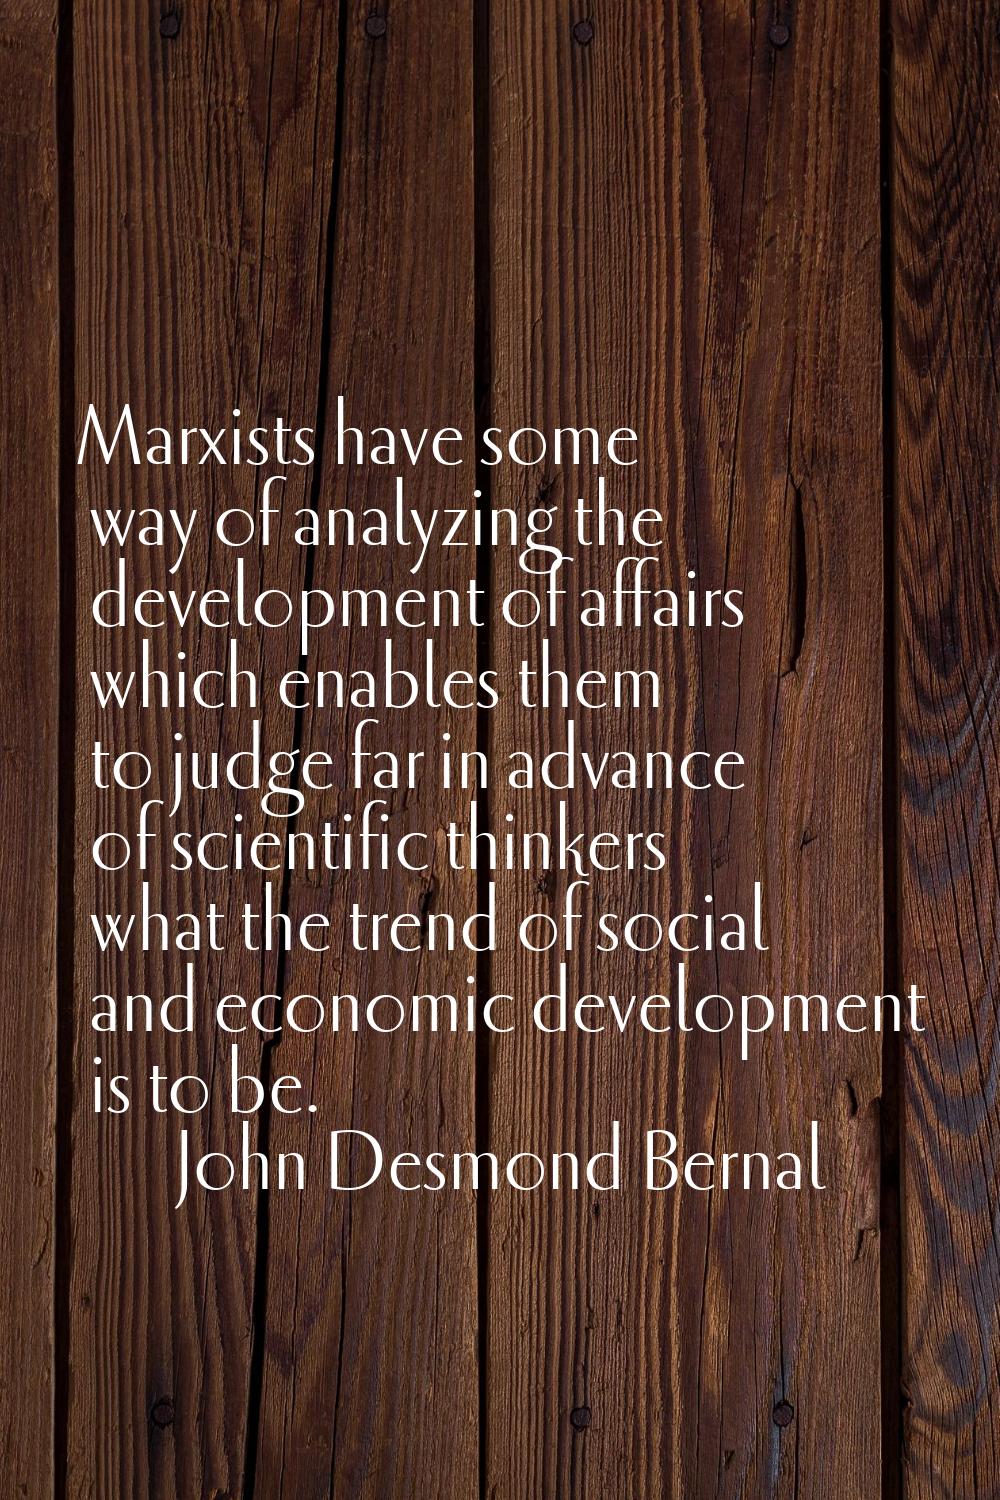 Marxists have some way of analyzing the development of affairs which enables them to judge far in a